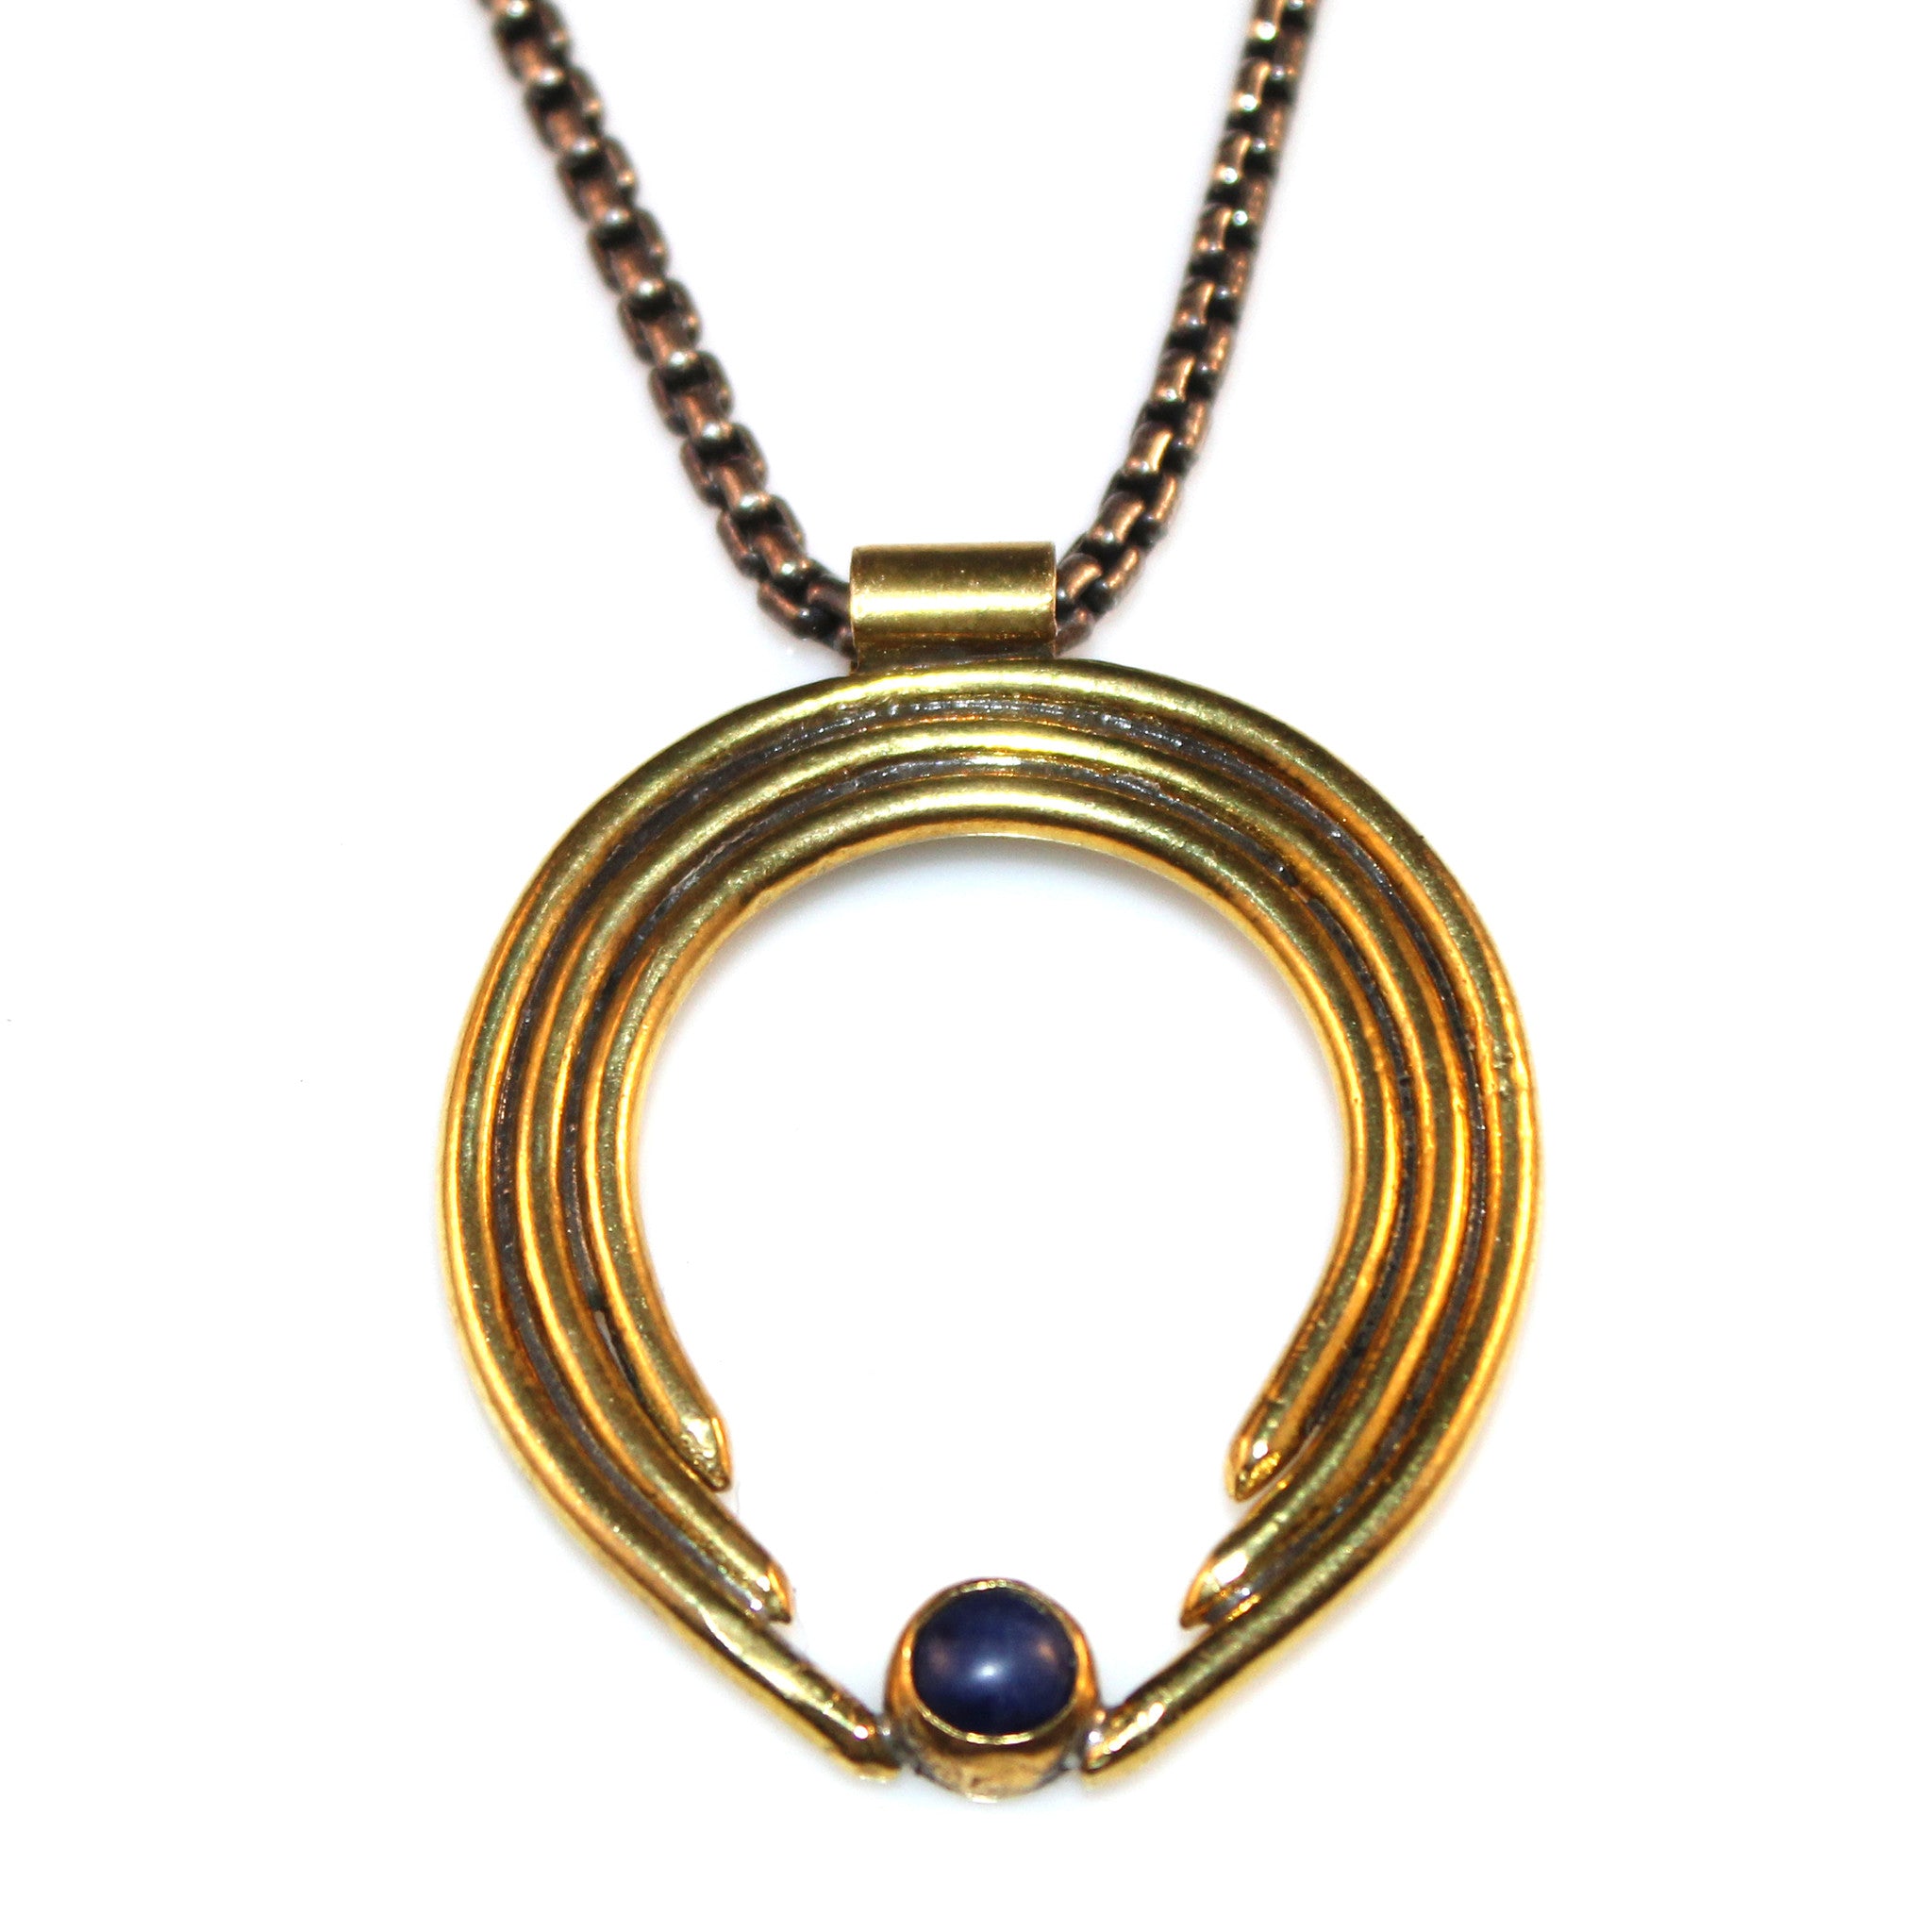 Donia Necklace - Center Stone